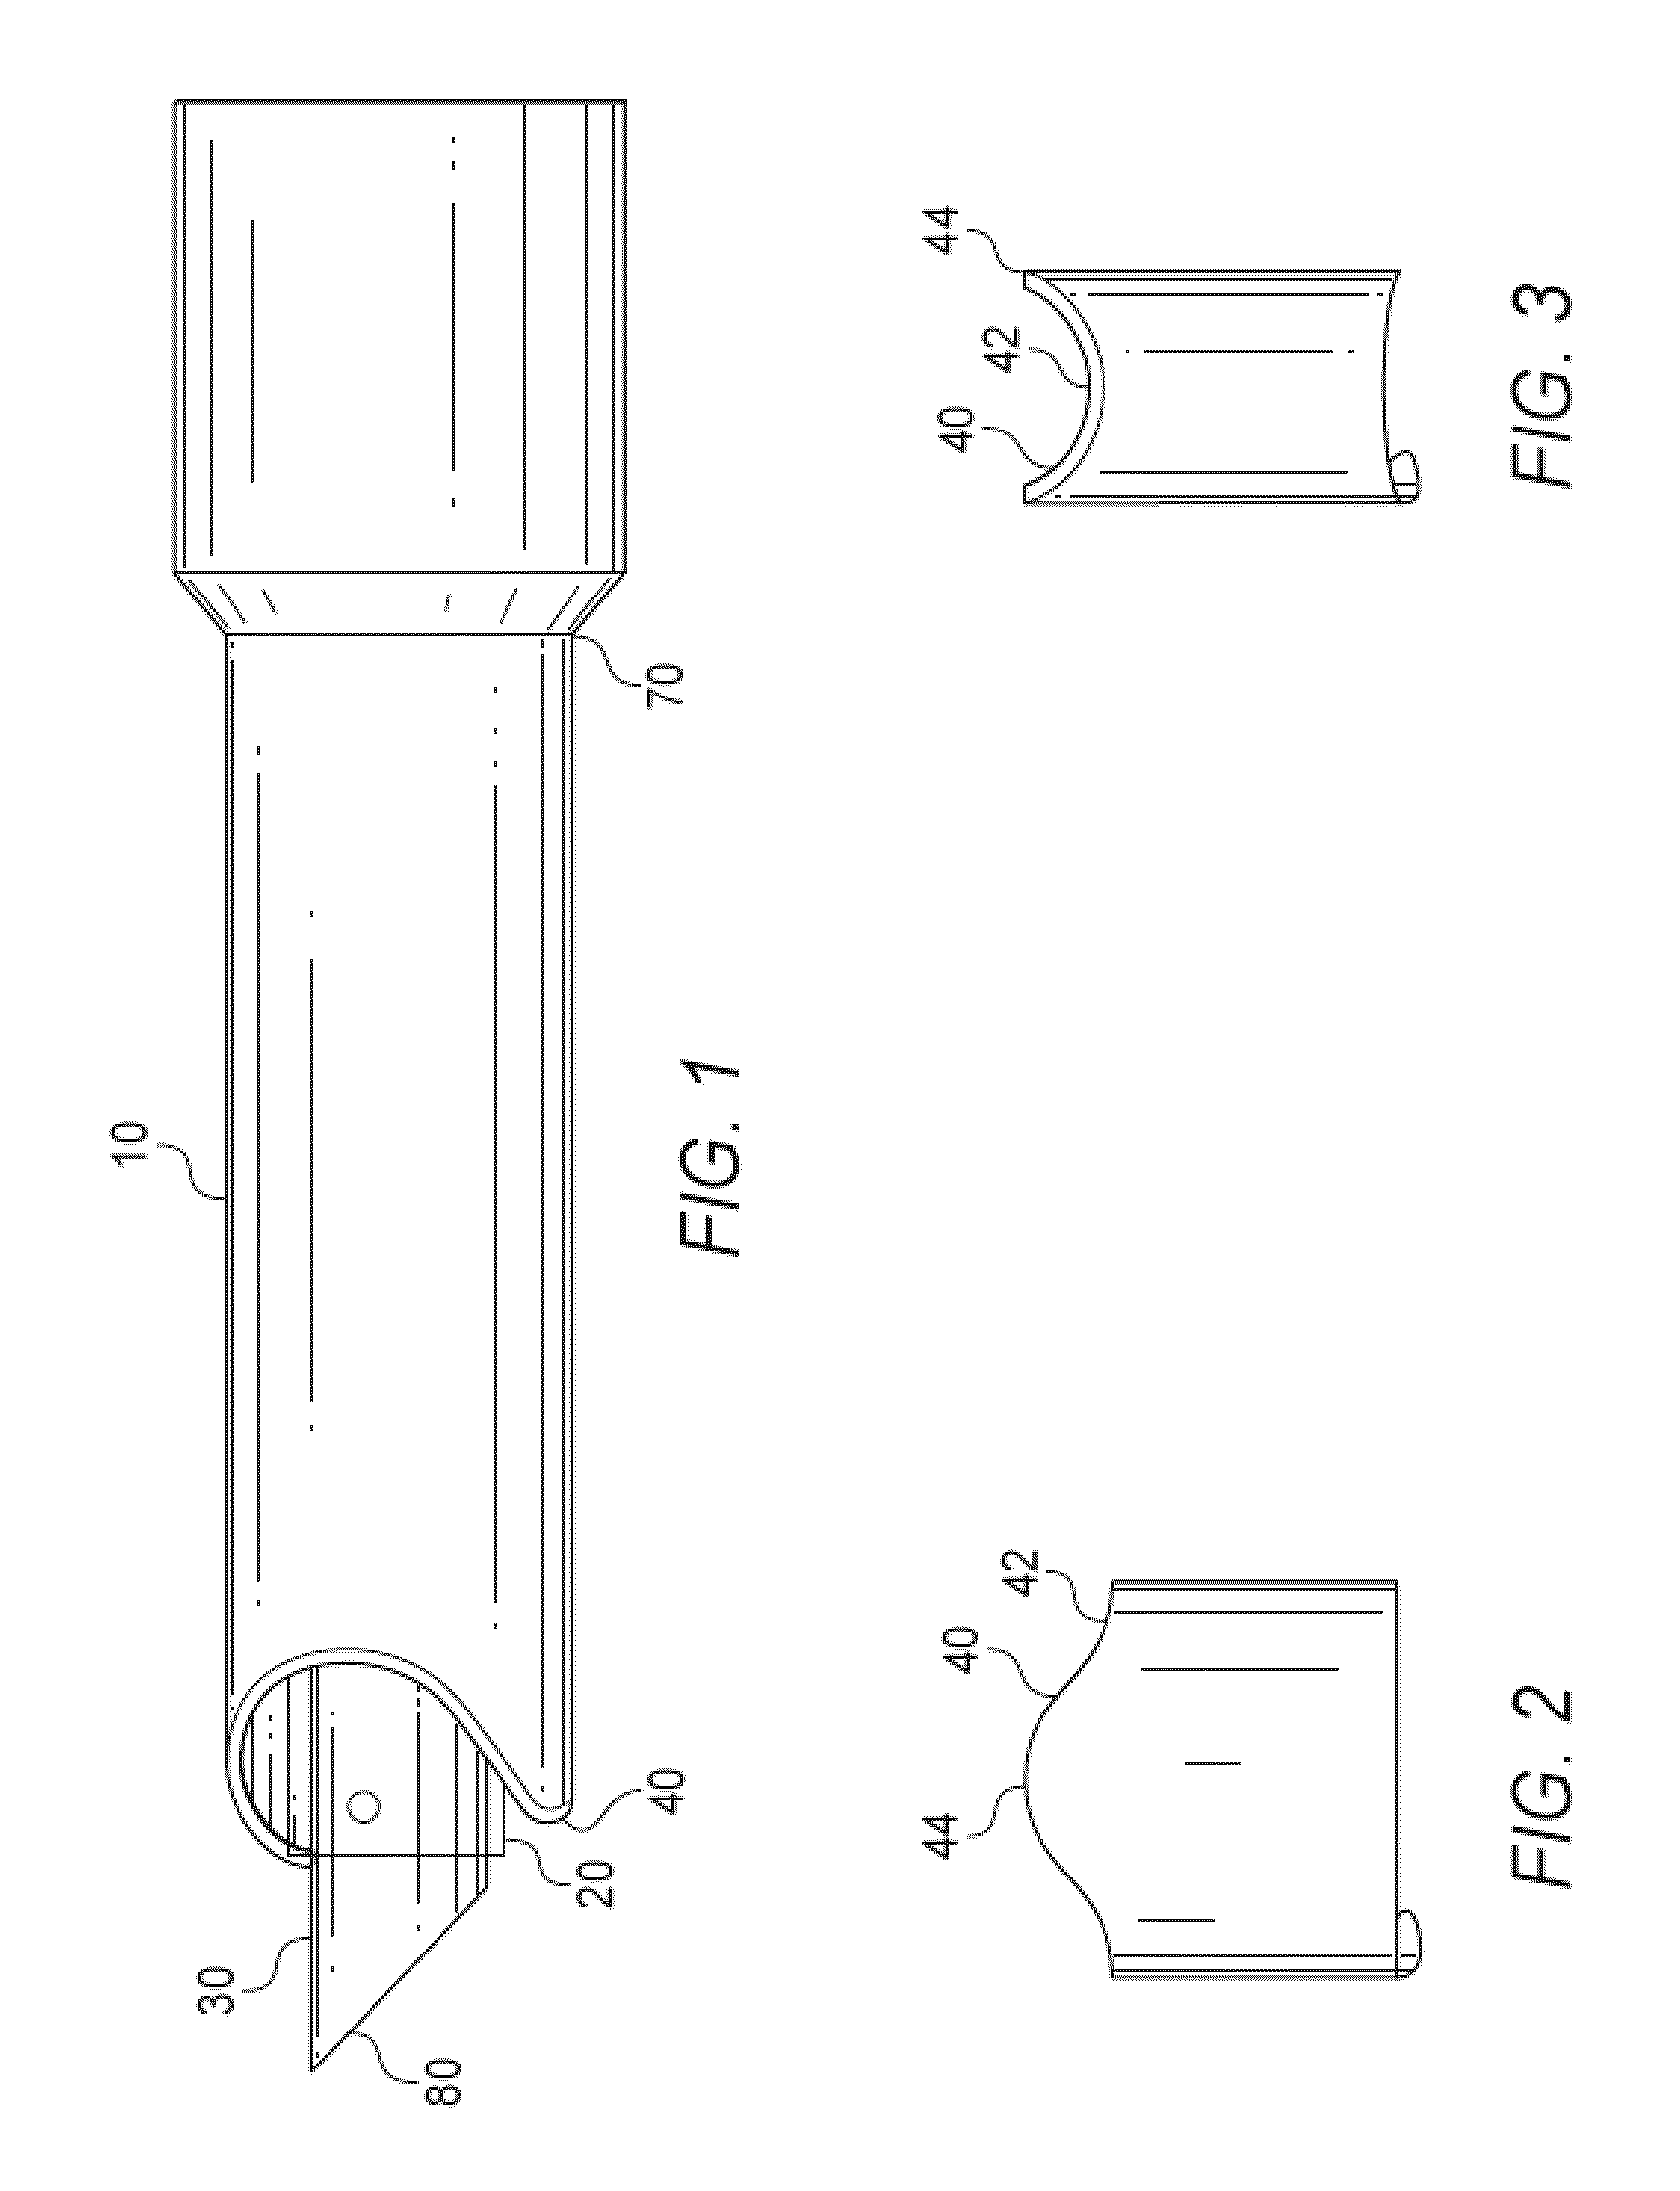 Multi-sleeved surgical ultrasonic vibrating tool suited for phacoemulsification in a manner that prevents thermal injury to ocular tissue